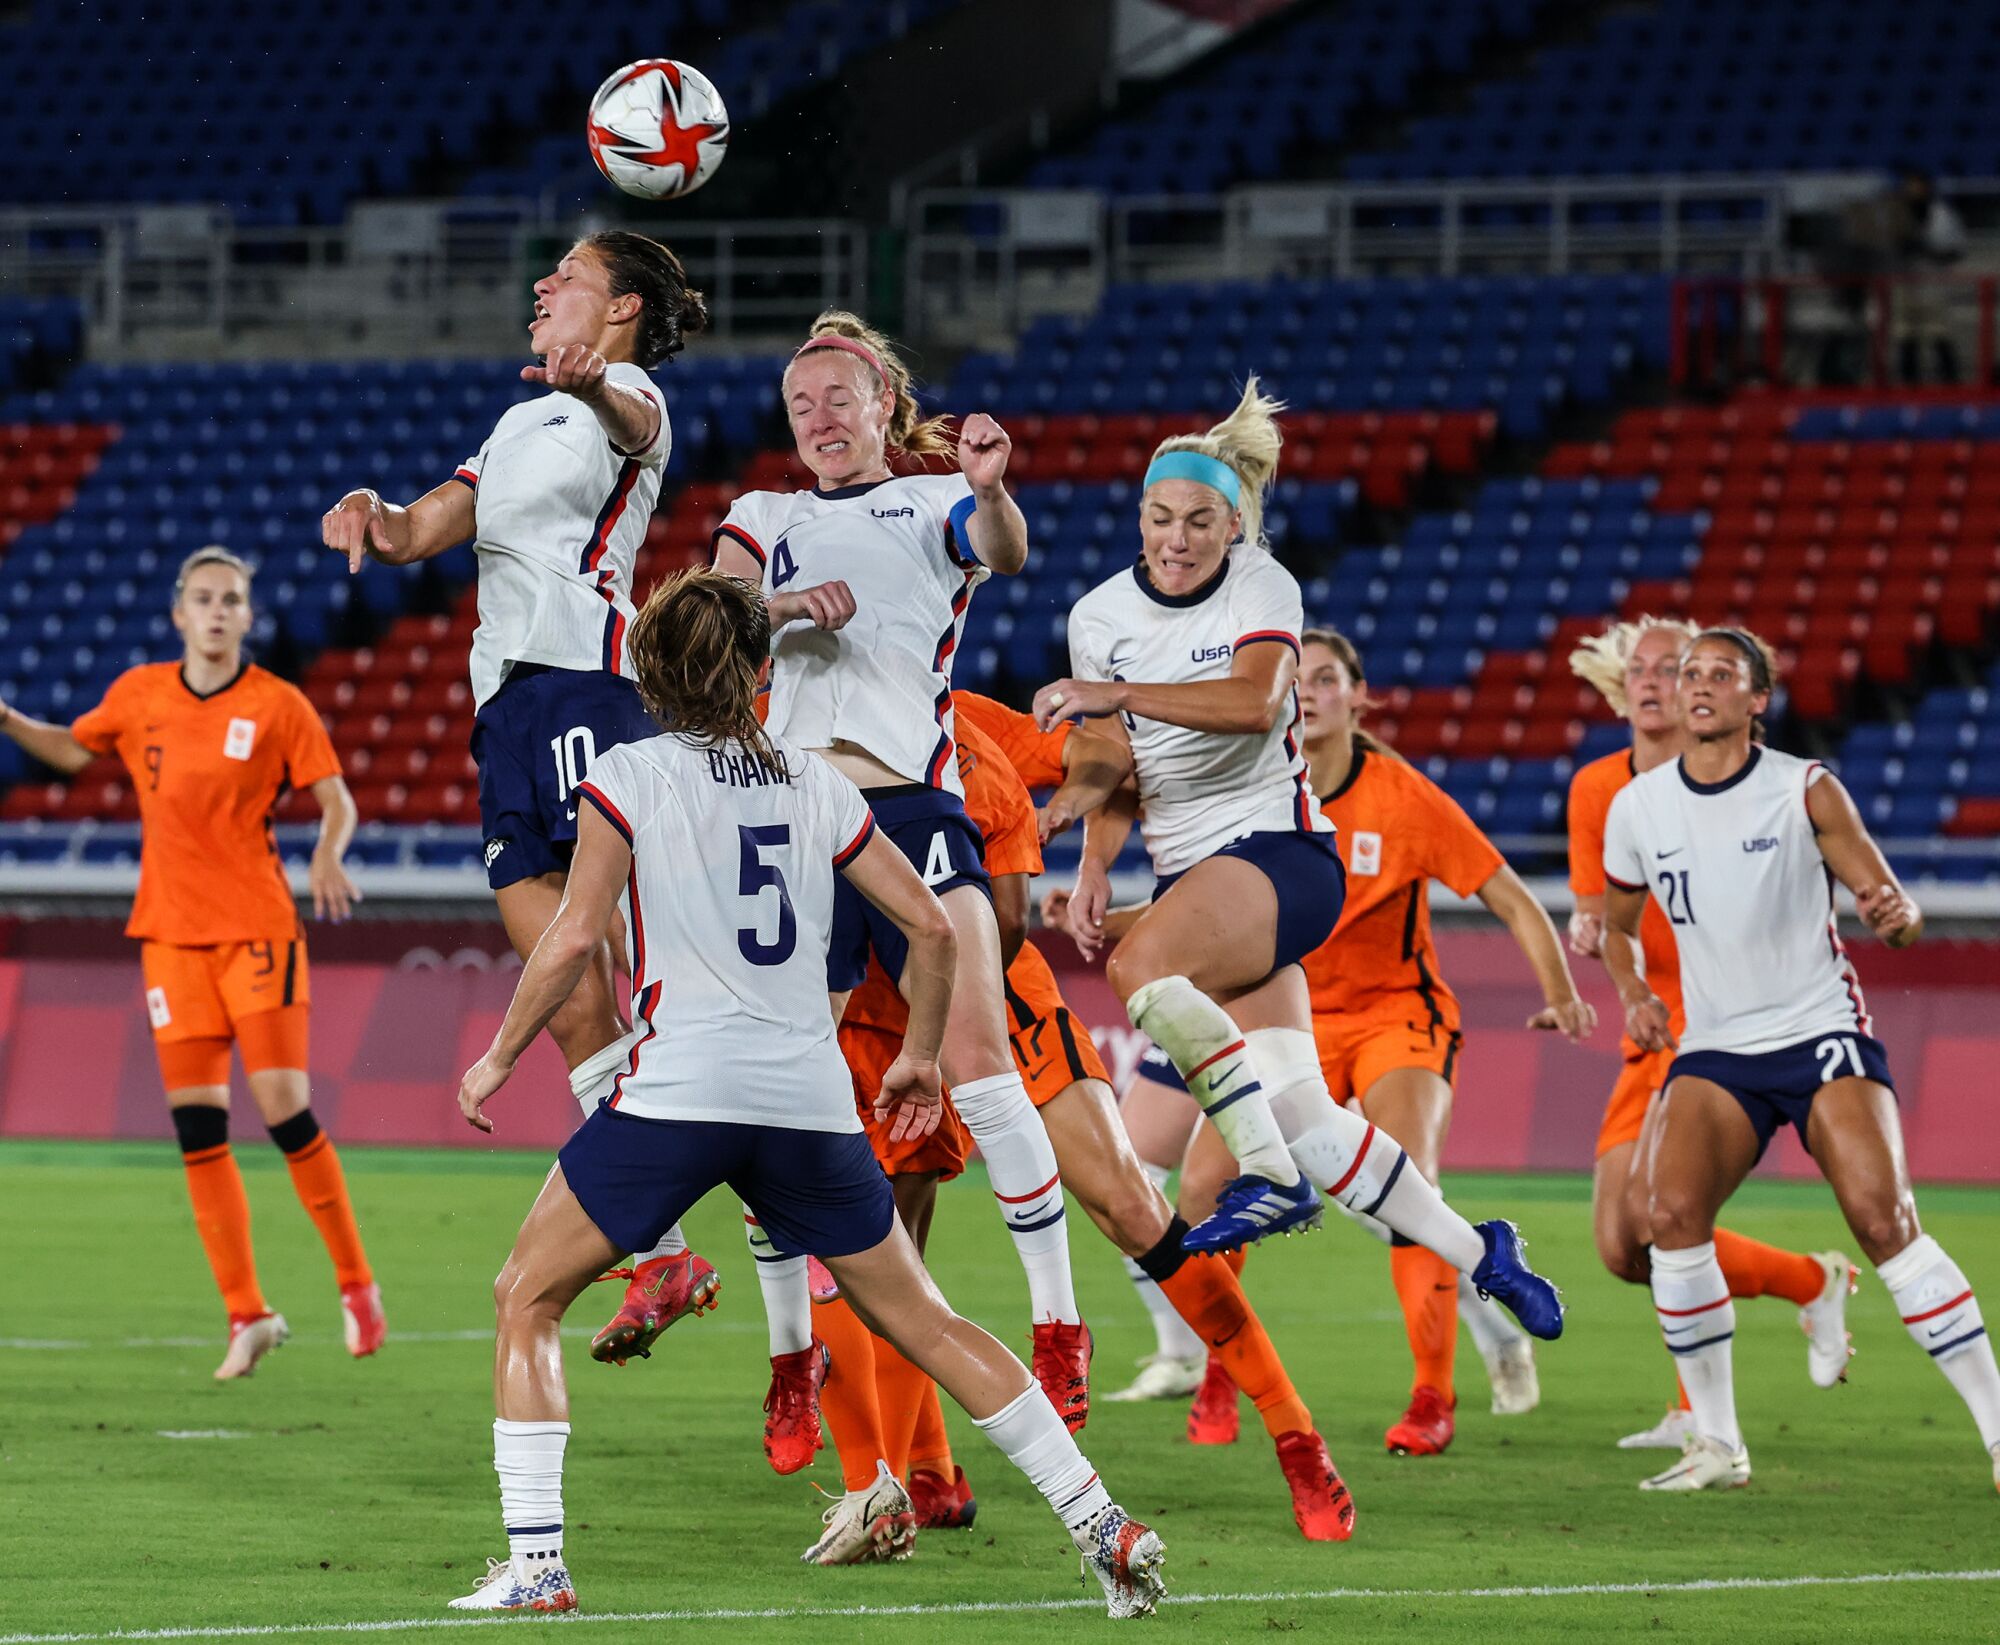 USA defenders defend the goal against Netherlands attackers.